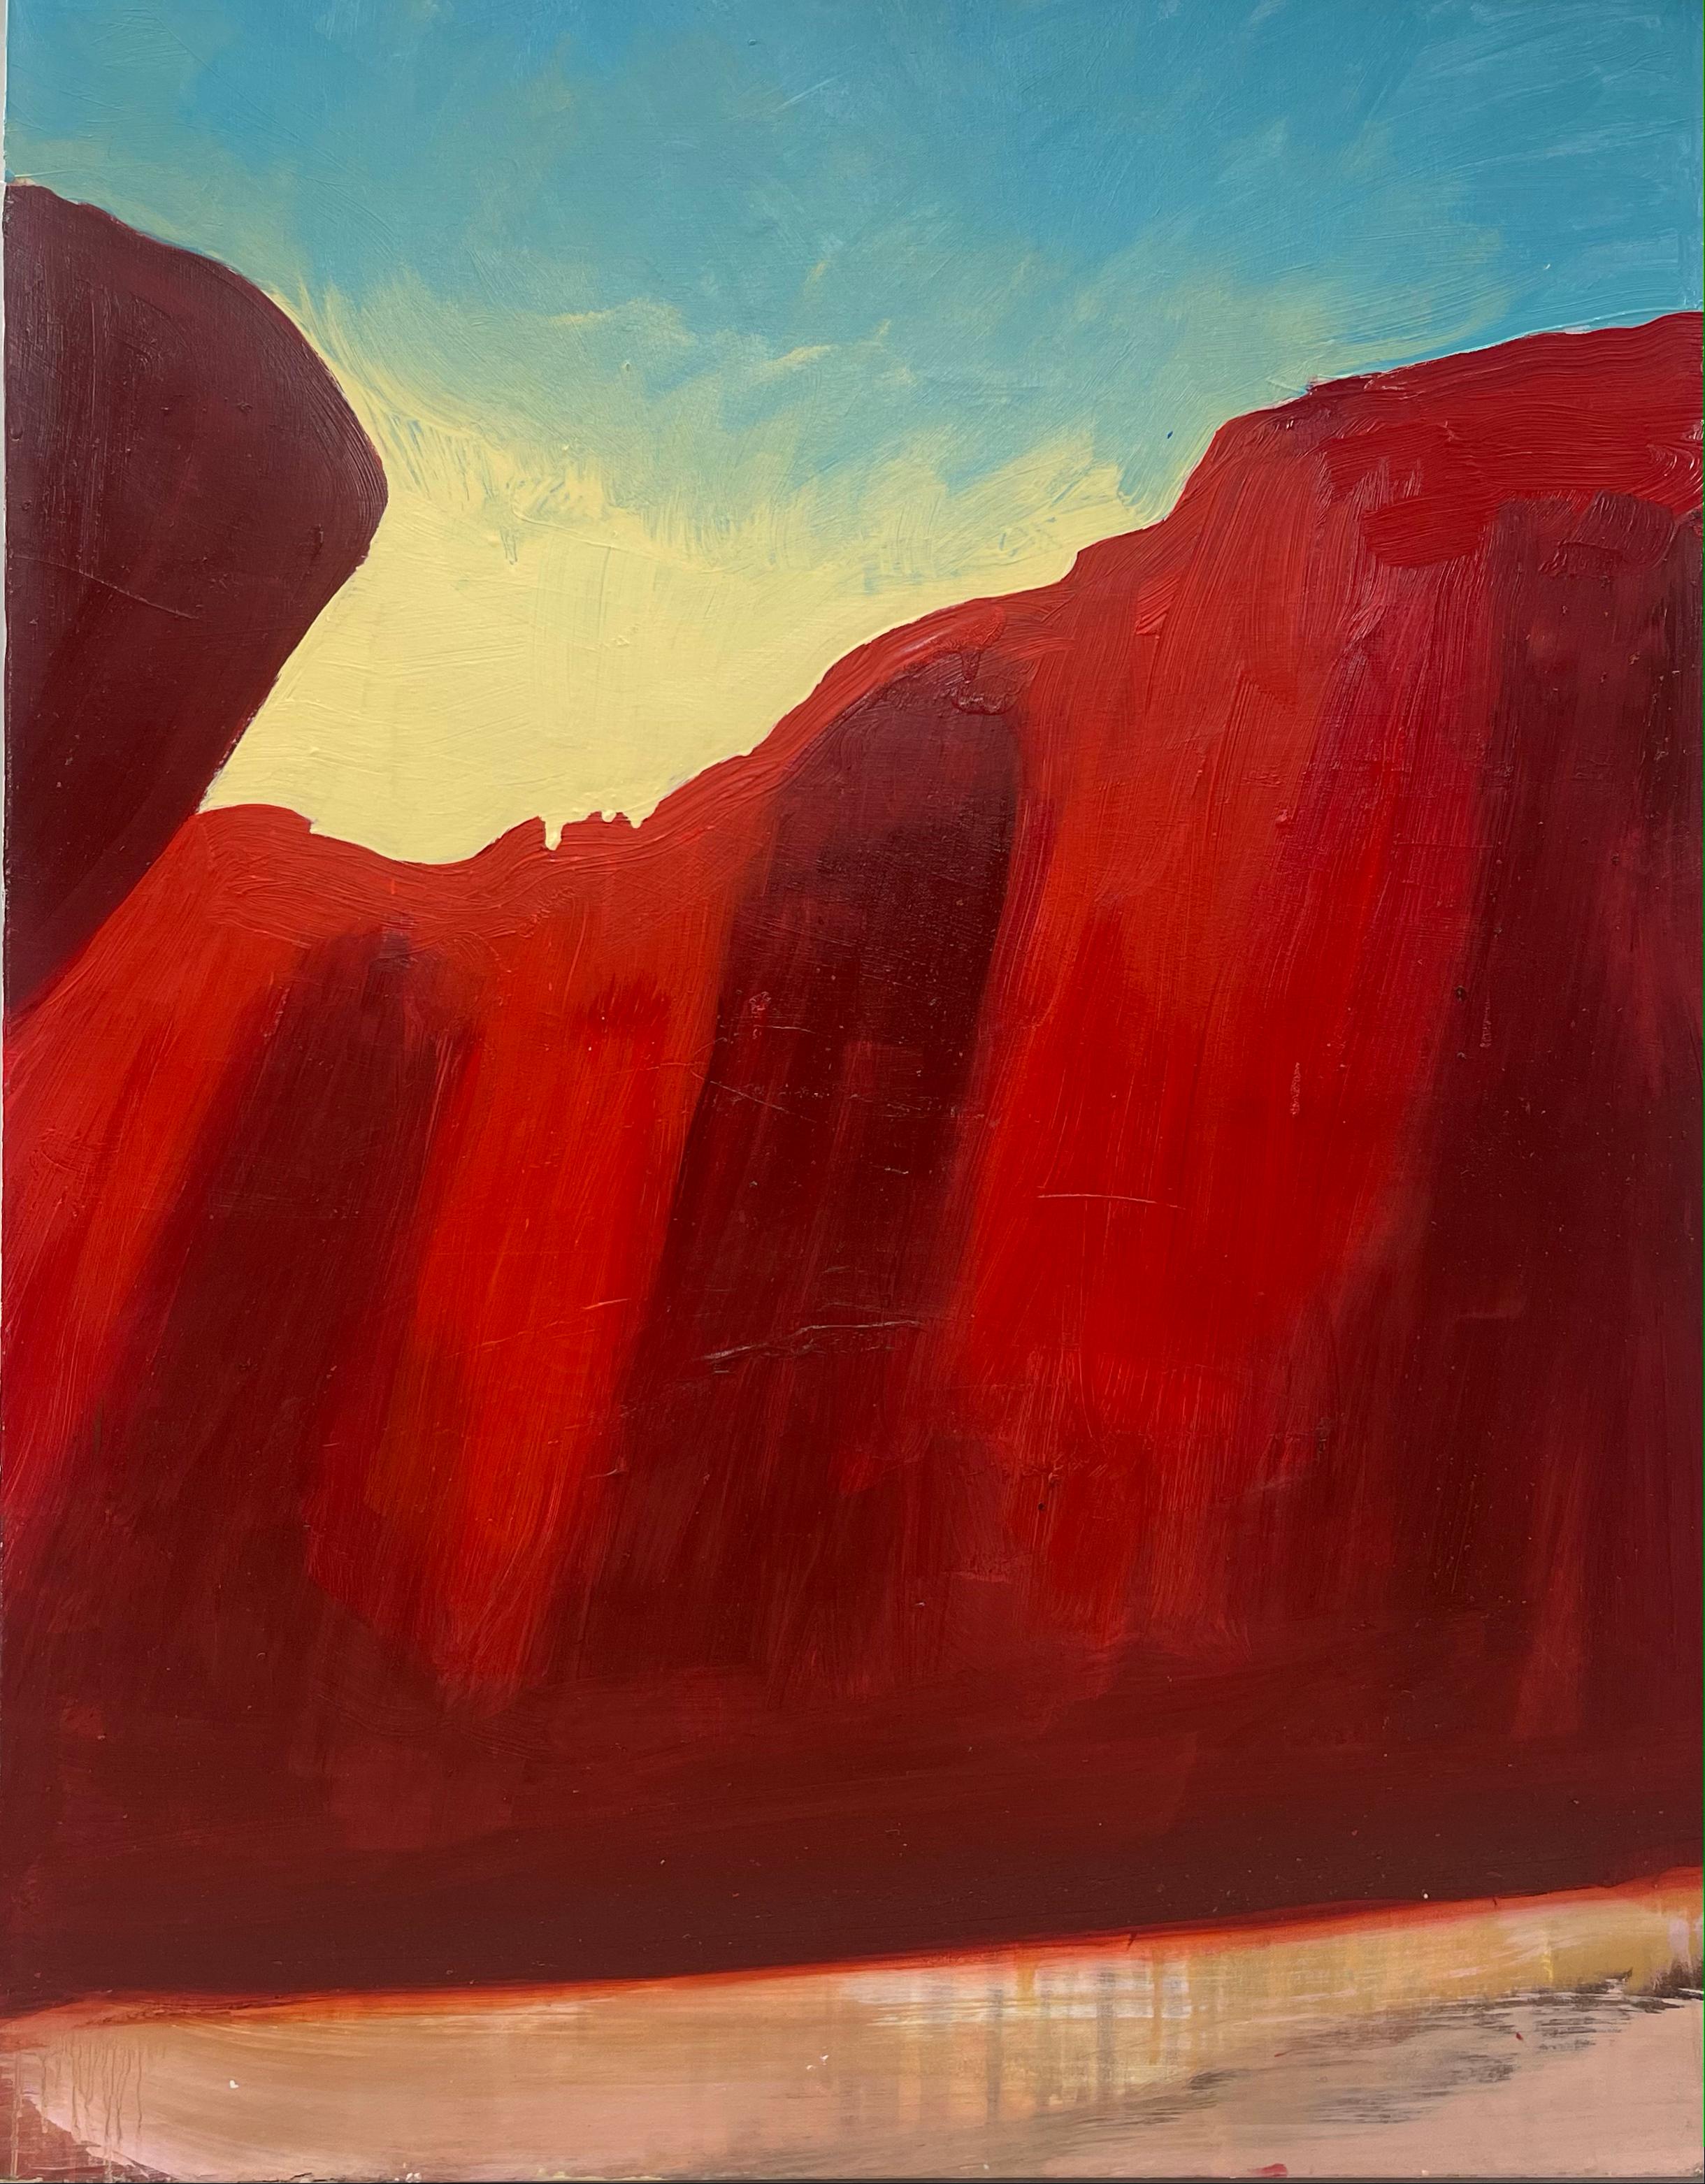 Kate Snow Landscape Painting - Red Cliff, impressionistic landscape painting